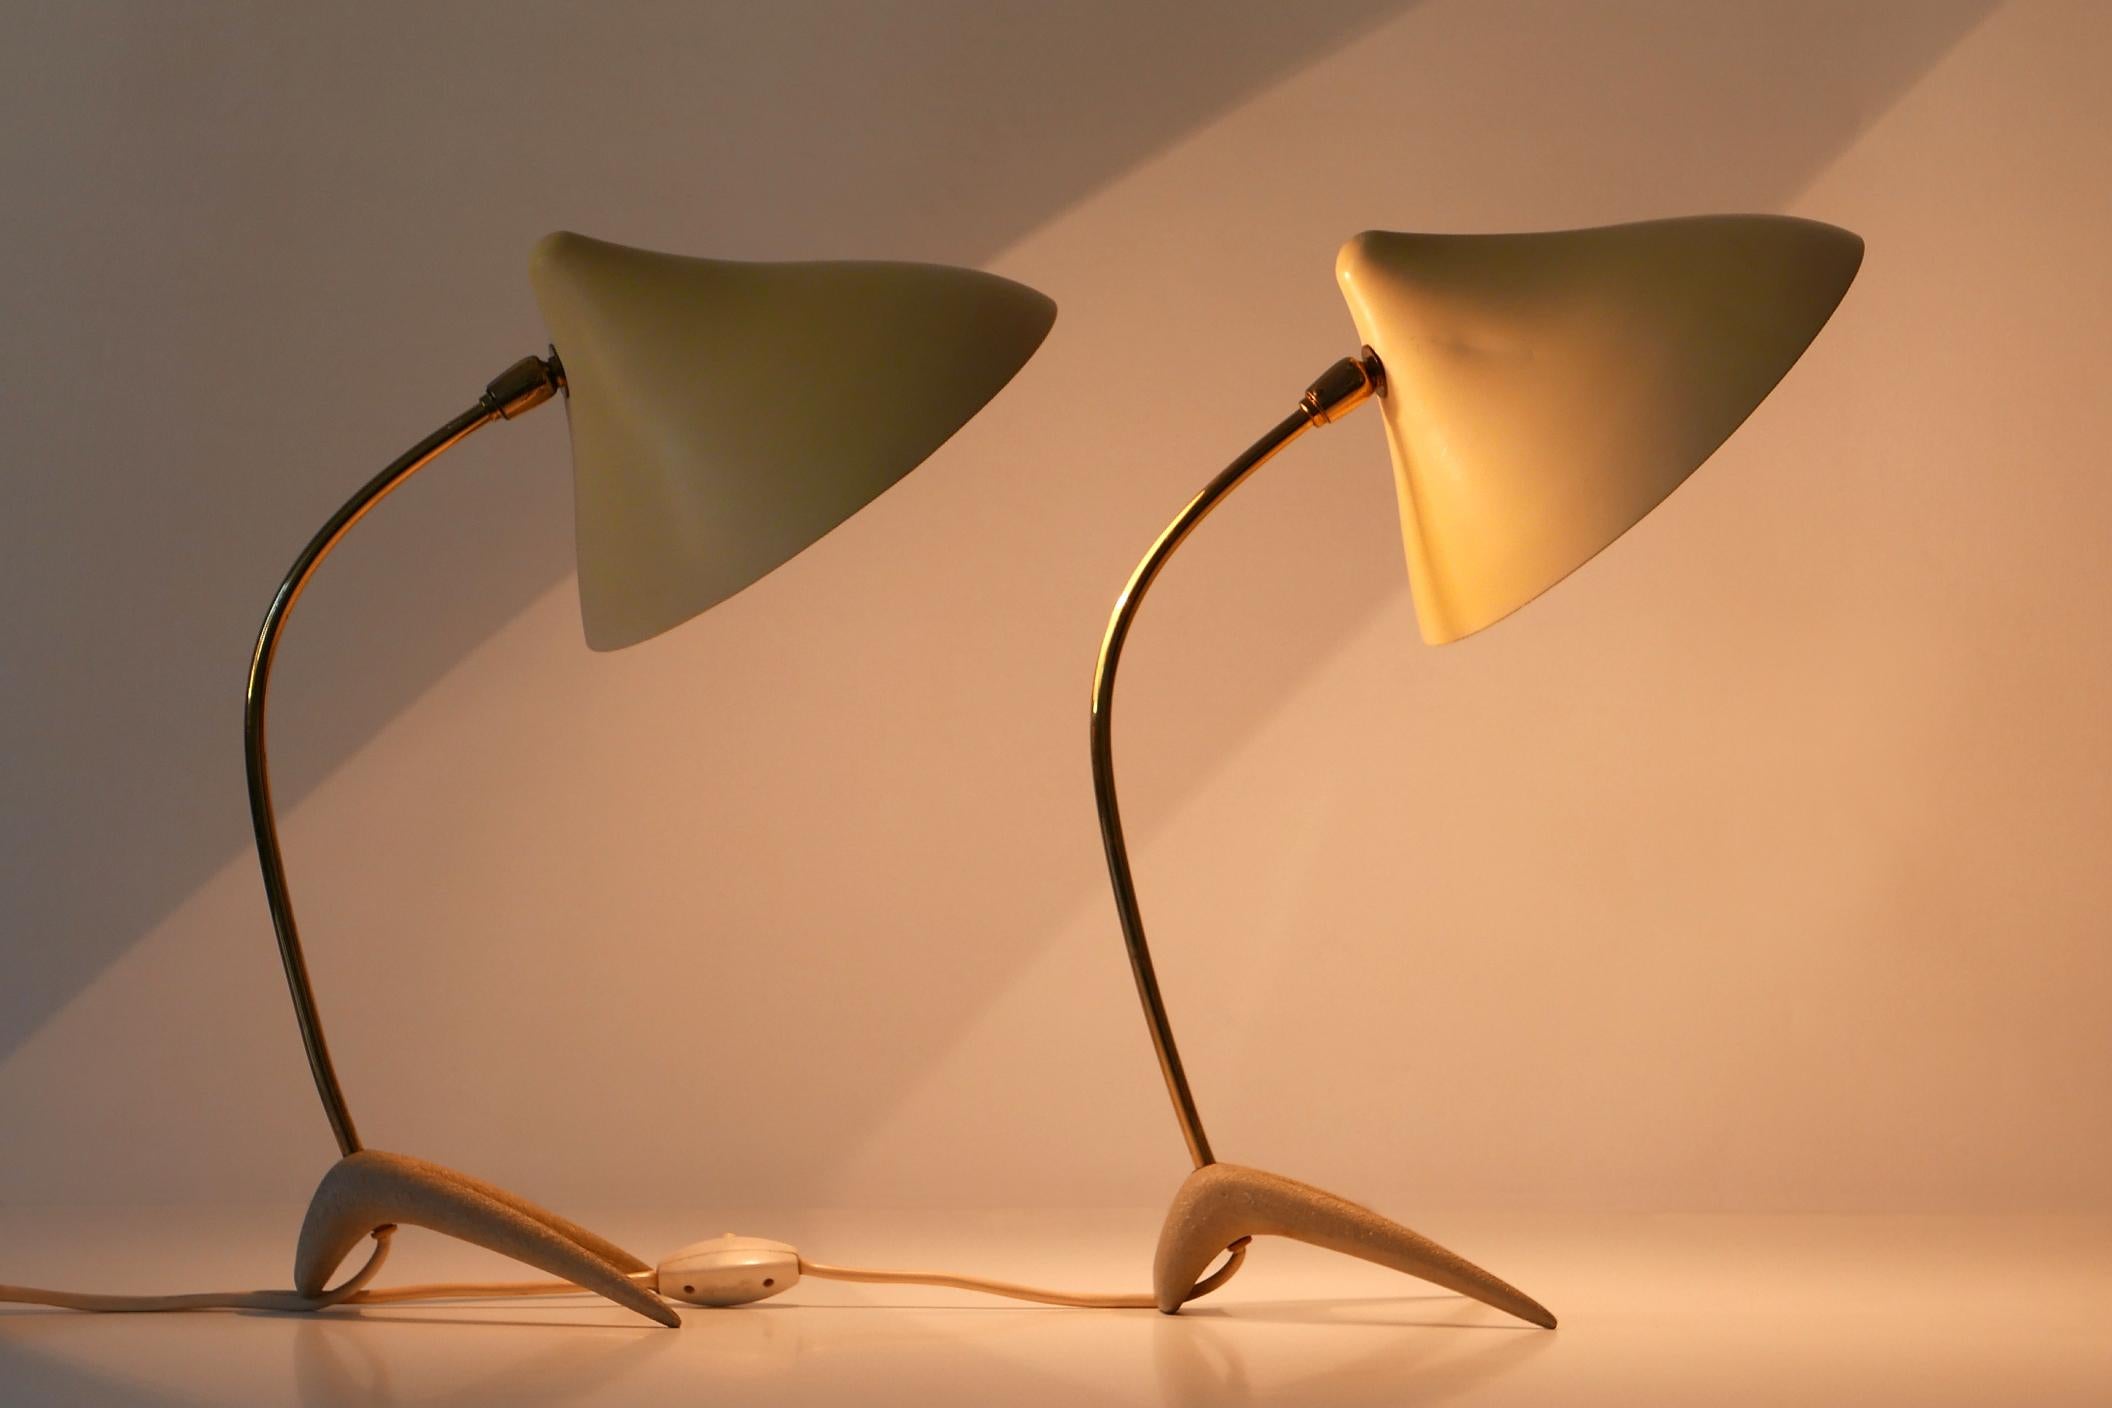 Set of two rare and lovely Mid-Century Modern table lamps with adjustable lamp shades. Designed by Louis Kalff for Gebrüder Cosack, 1950s, Neheim-Hüsten, Germany

Executed in brass tube, enameled aluminum and cast metal, each lamp comes with 1 x 27